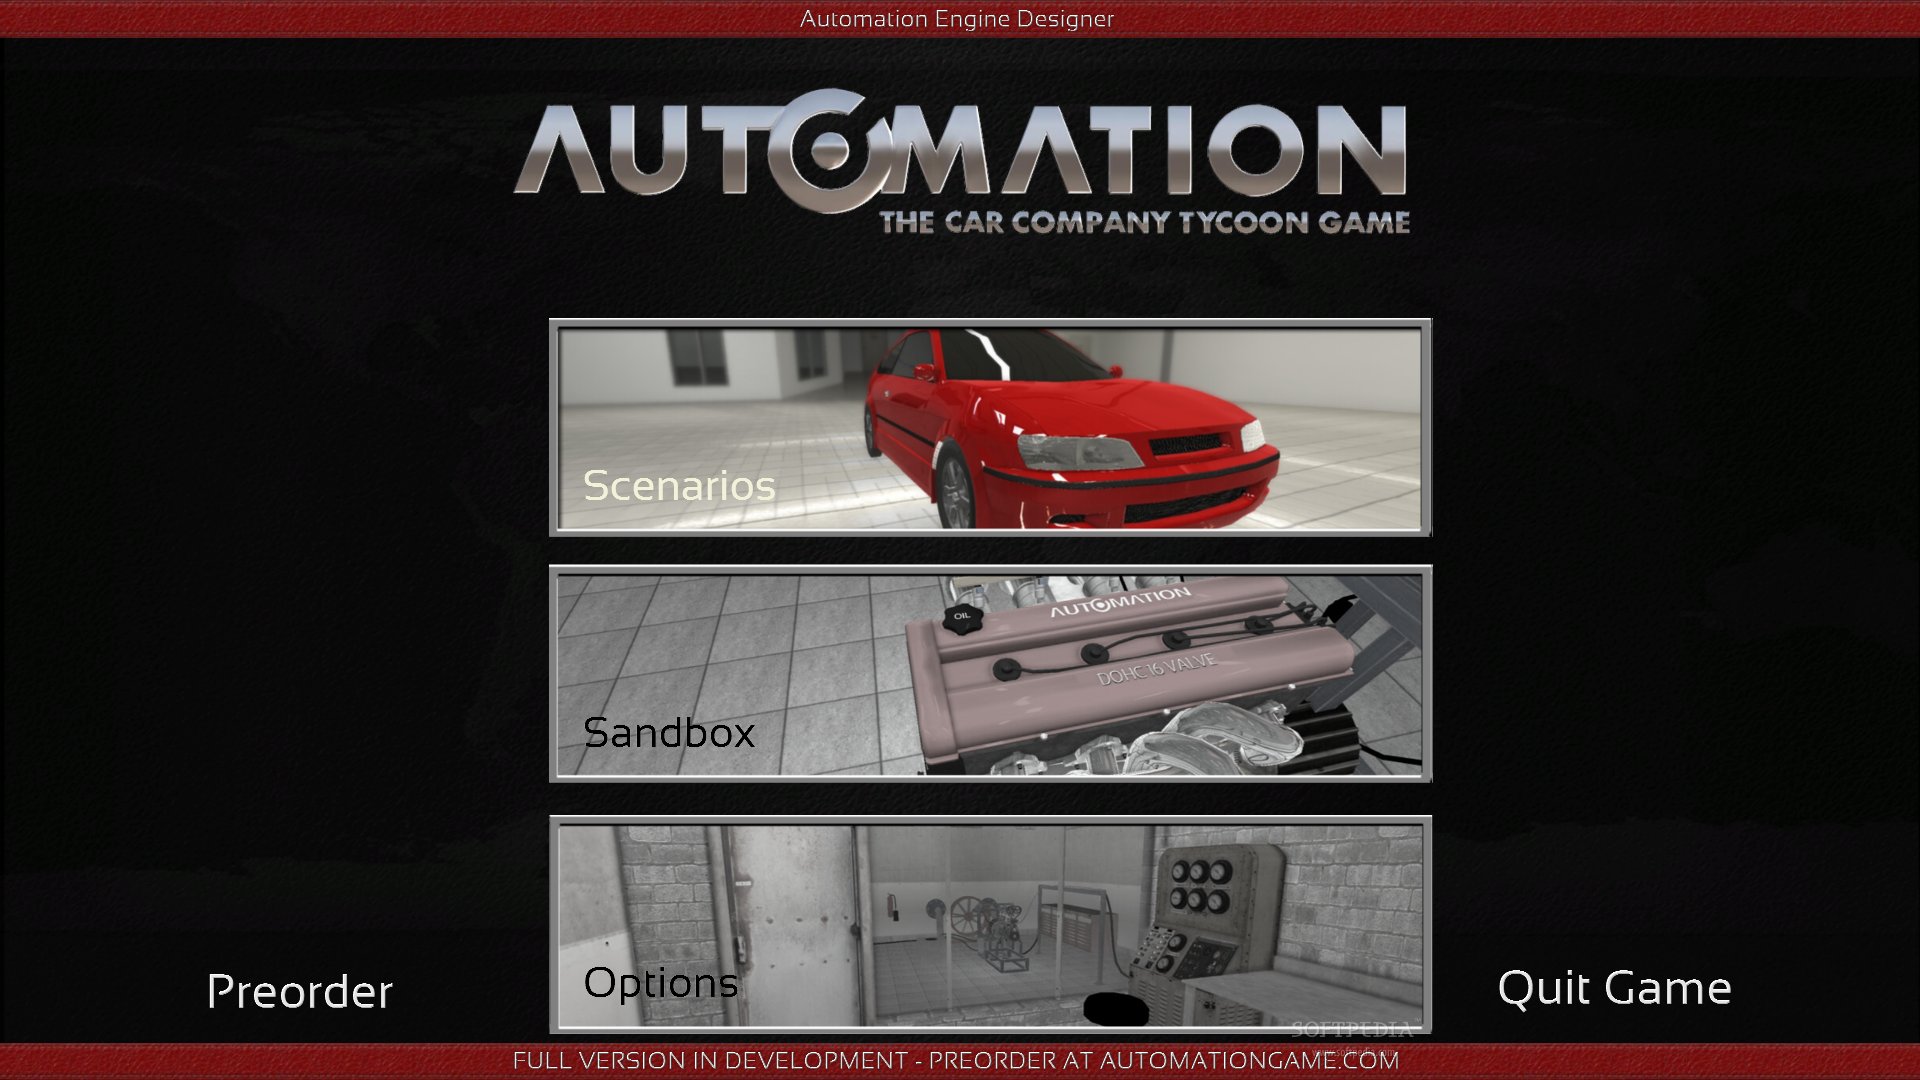 Automation game full version download - blockpooter